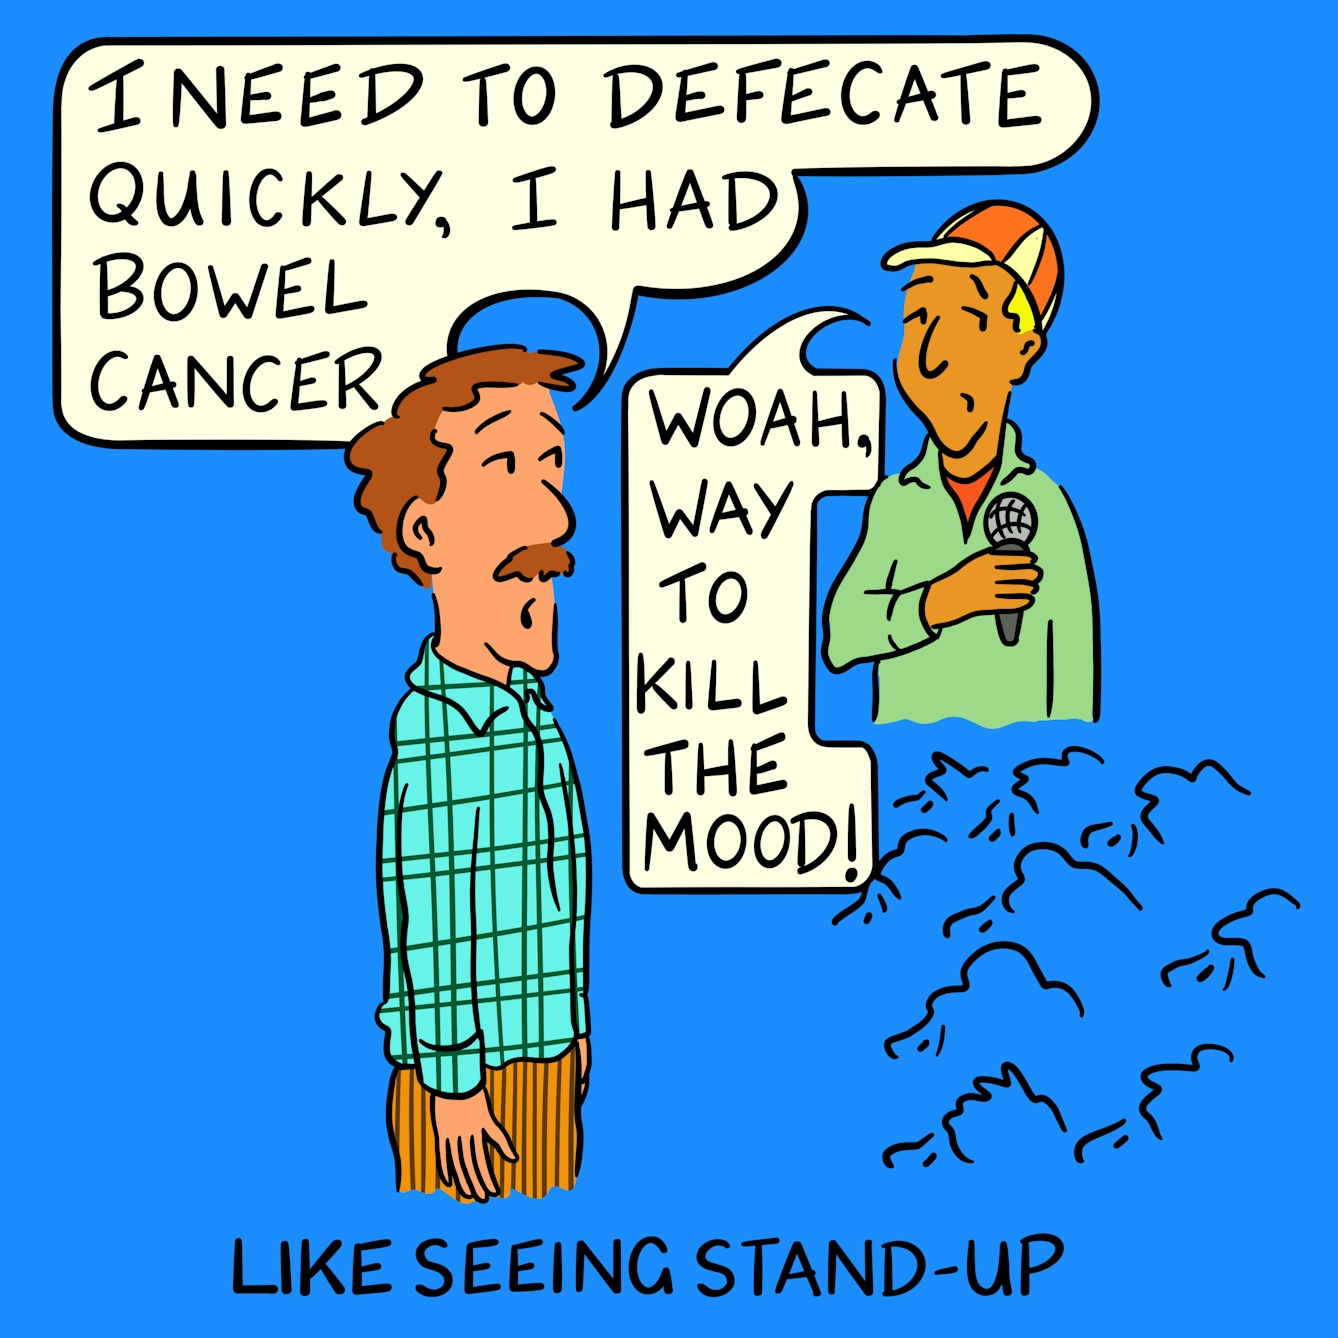 Panel 4 of a four-panel comic drawn digitally: a white man with a moustache, corduroy trousers and a plaid shirt, with the outline of seated heads around waist-height, turns to face a person wearing a baseball cap and holding a microphone. He says "I need to defecate quickly, I had bowel cancer." The person holding the microphone guiltily looks away and says "Woah, way to kill the mood!" The caption text reads "Like seeing stand-up."